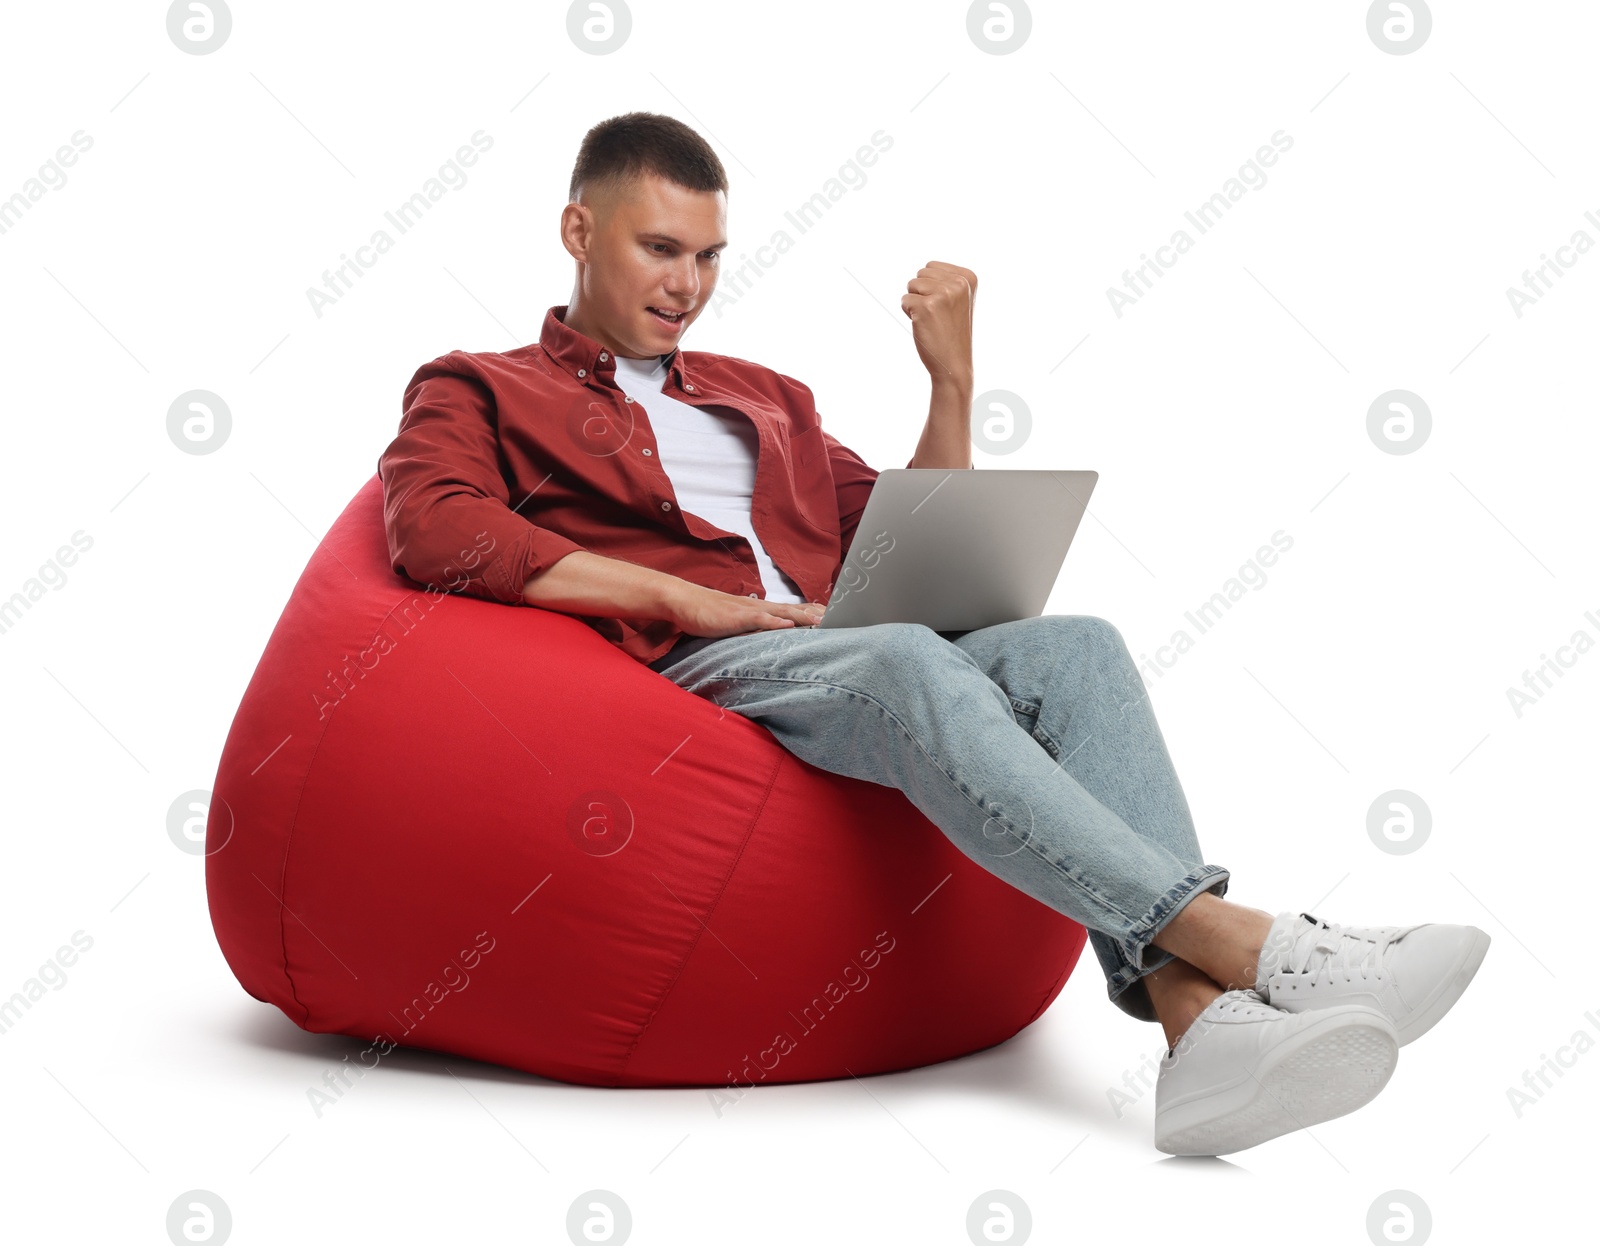 Photo of Man with laptop gesturing on red bean bag chair against white background